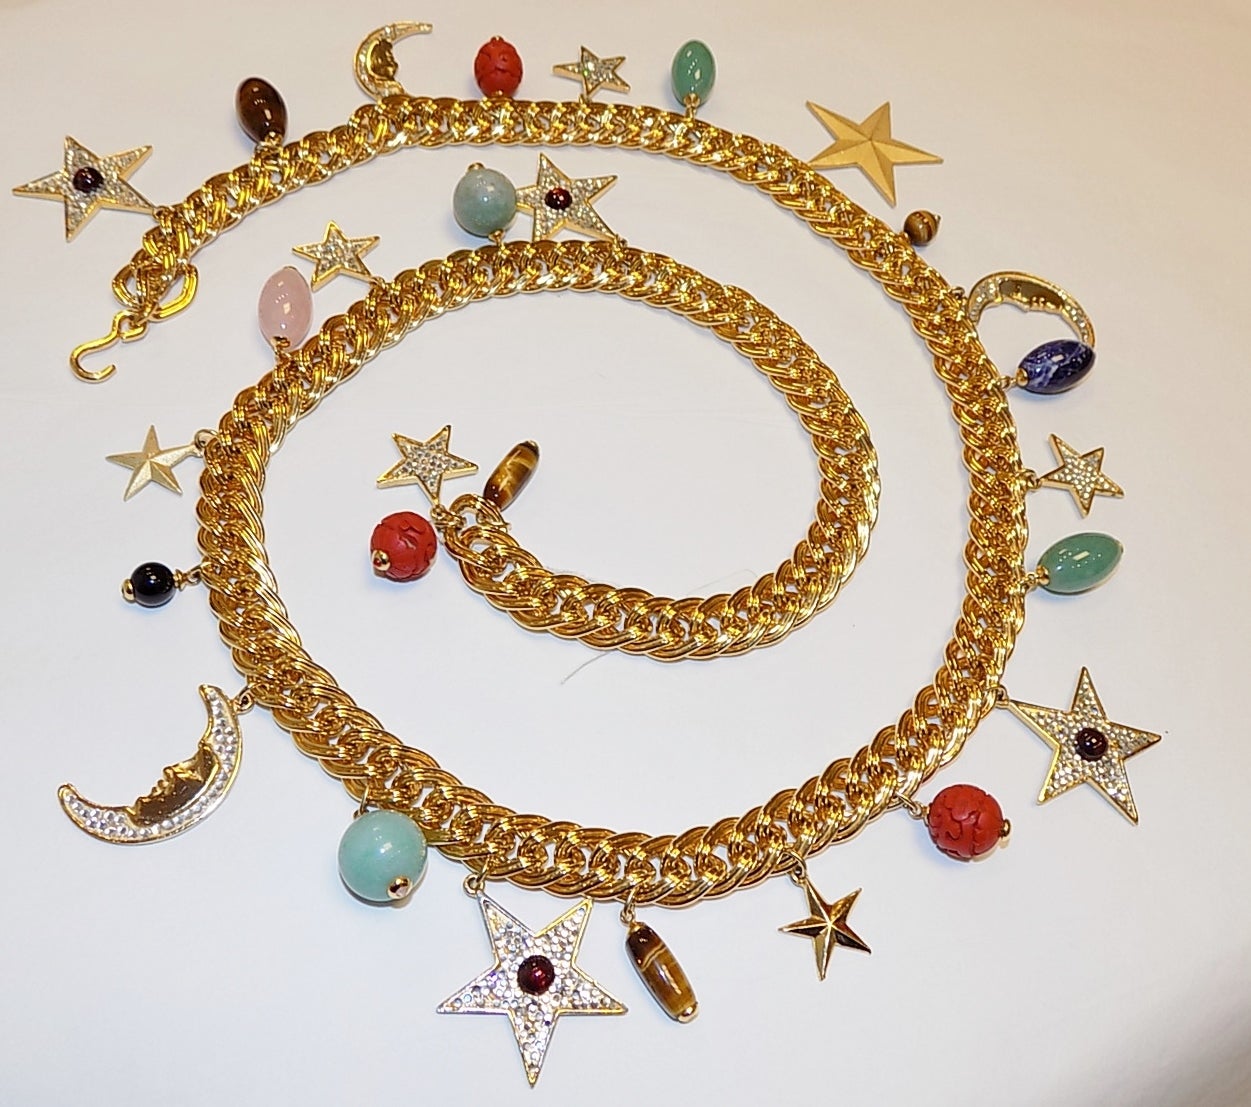 Women's Judith Leiber Chain Belt W/Semi Precious Stones and crystal Charms